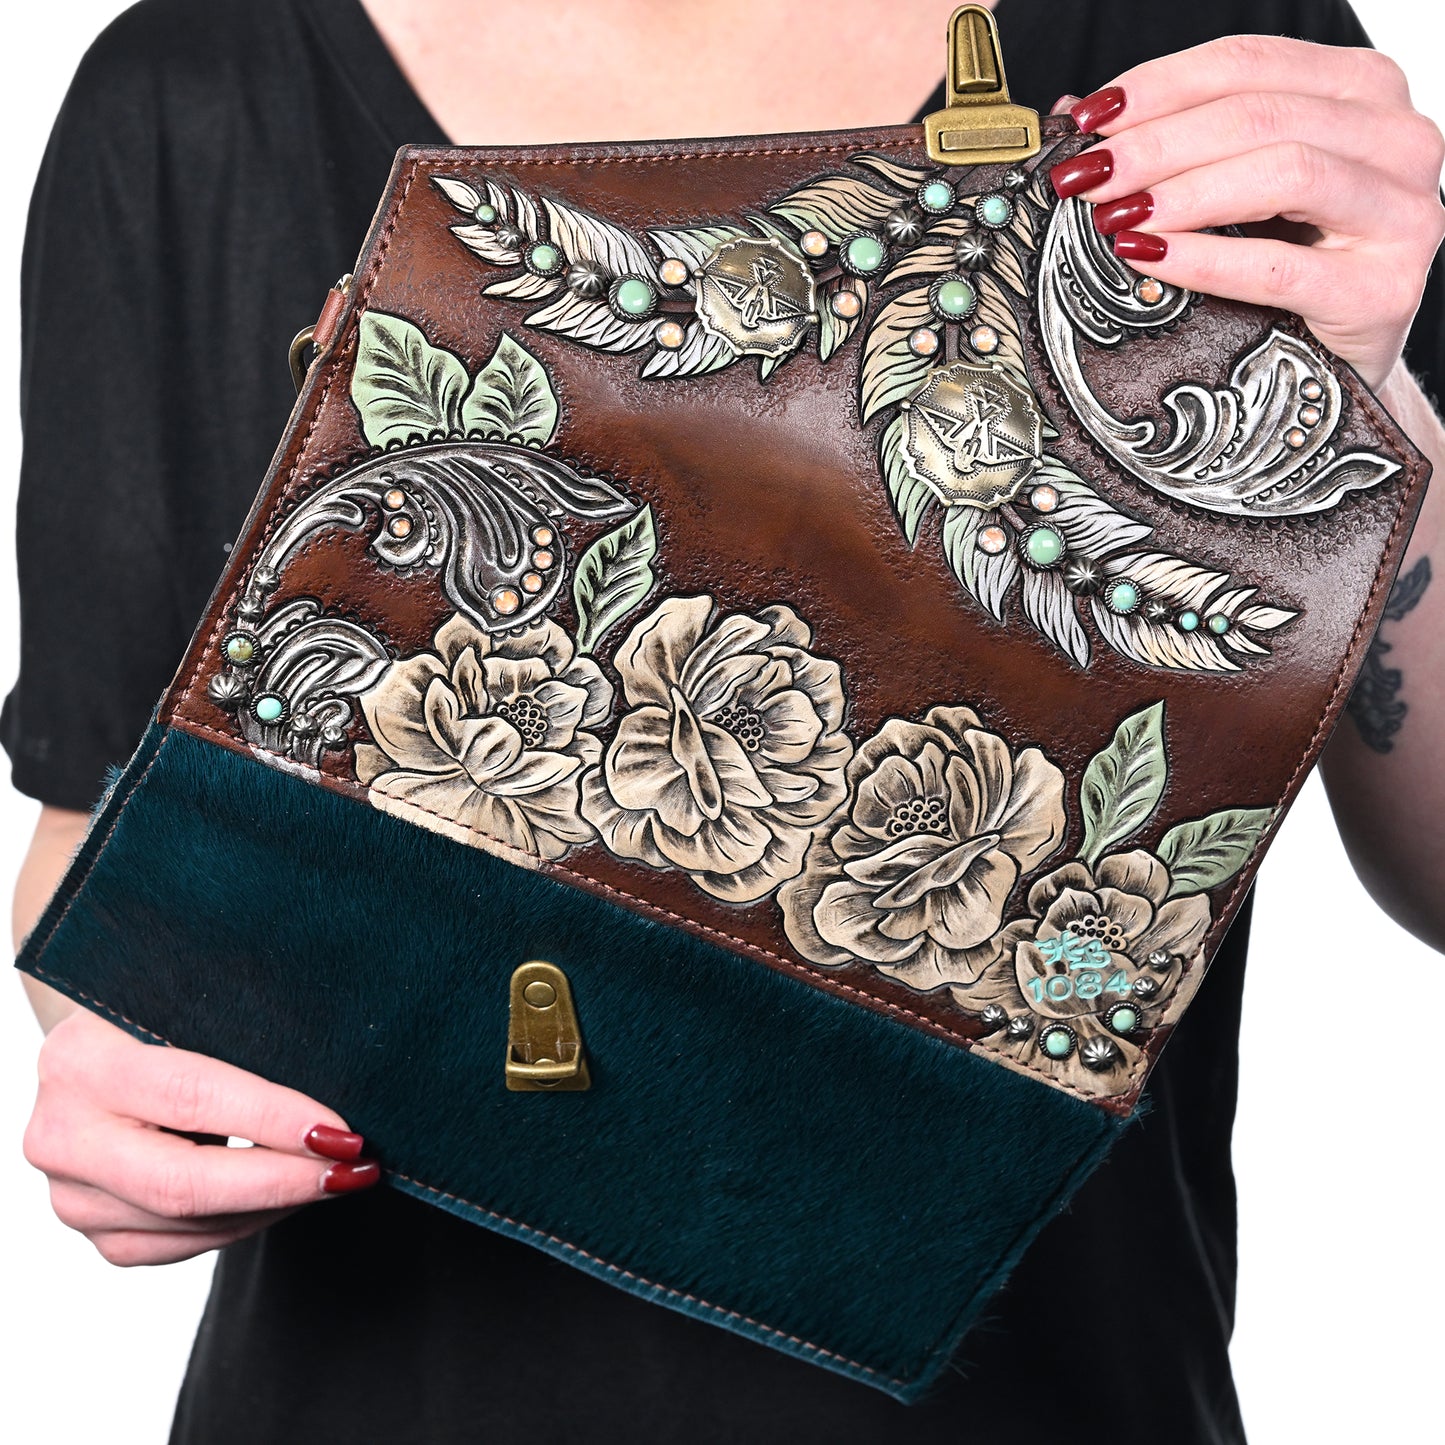 
                  
                    A person holding a Heritage Brand Nola Clutch #1084 with floral embossing and a contrasting green fur detail.
                  
                